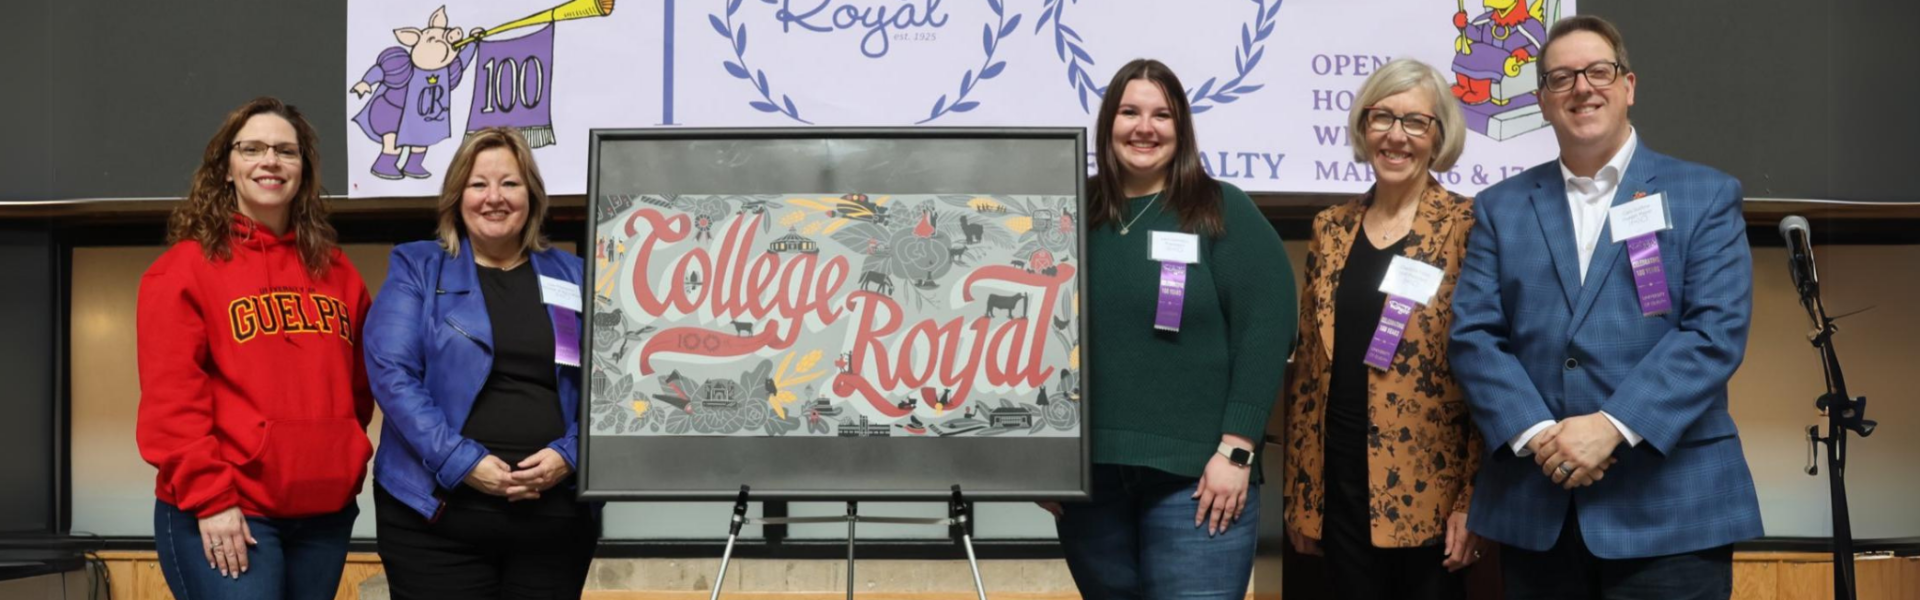 Five people pose for a photo while standing next to a easel showing a depiction of the planned College Royal mural